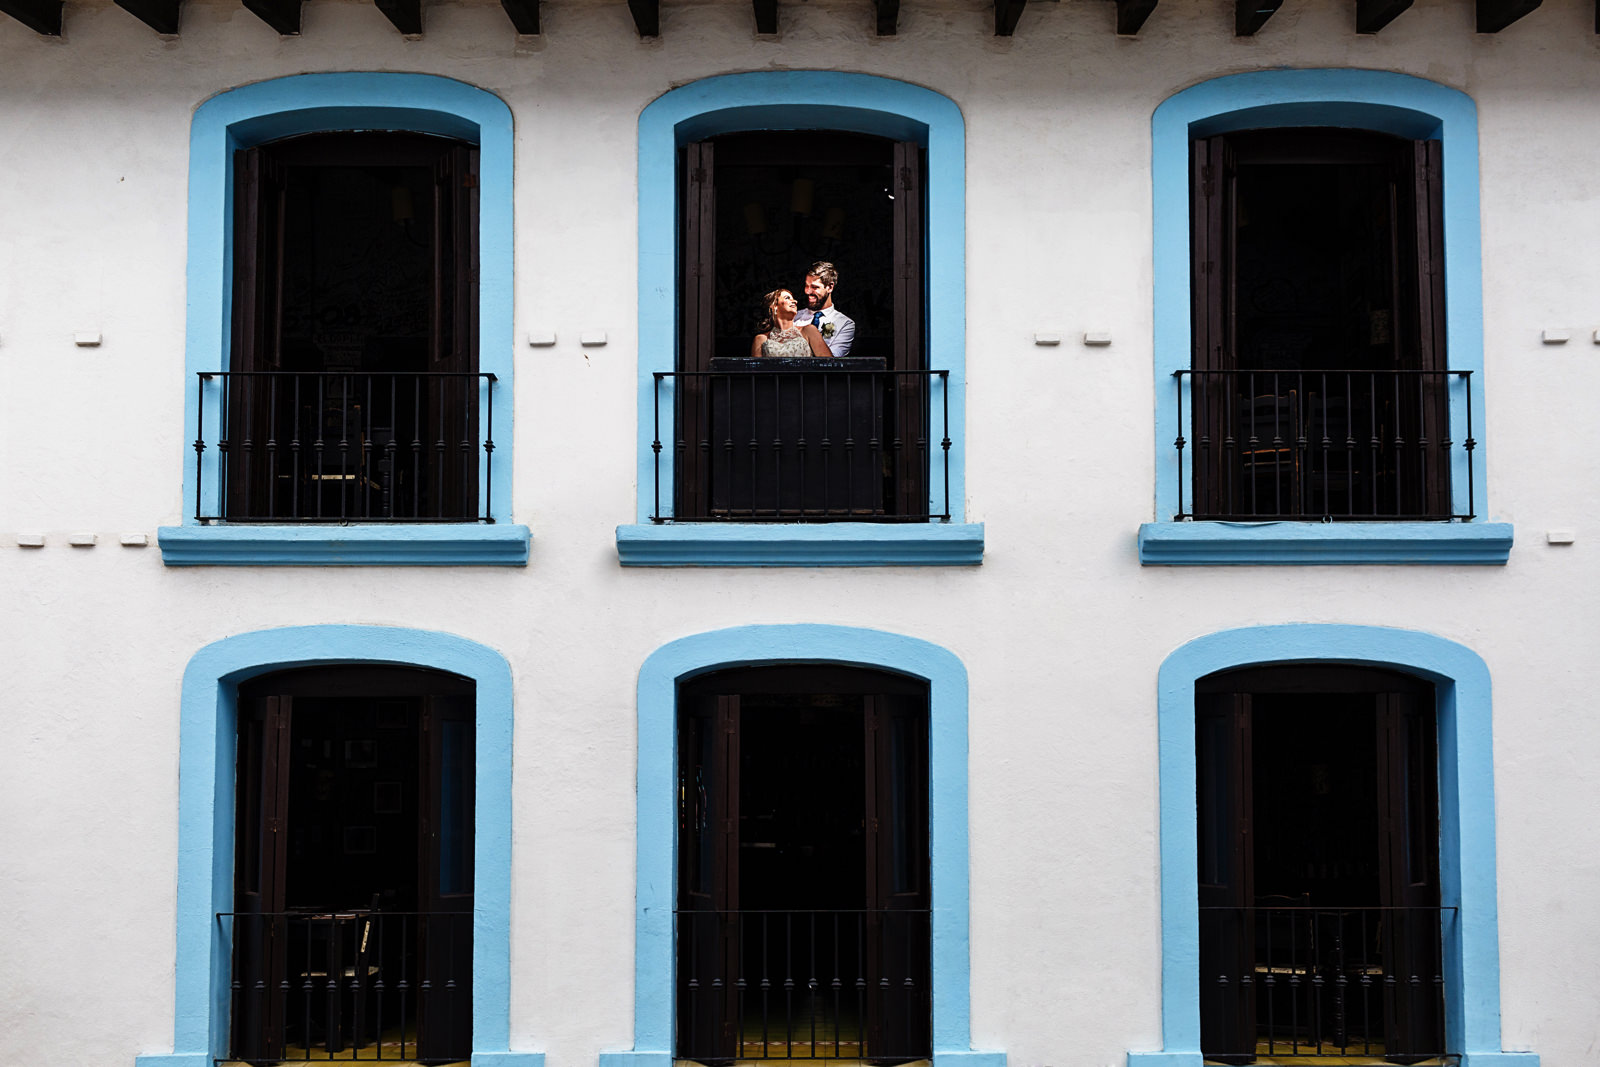 Groom and bride portrait, the couple is framed on a blue window with a white facade.